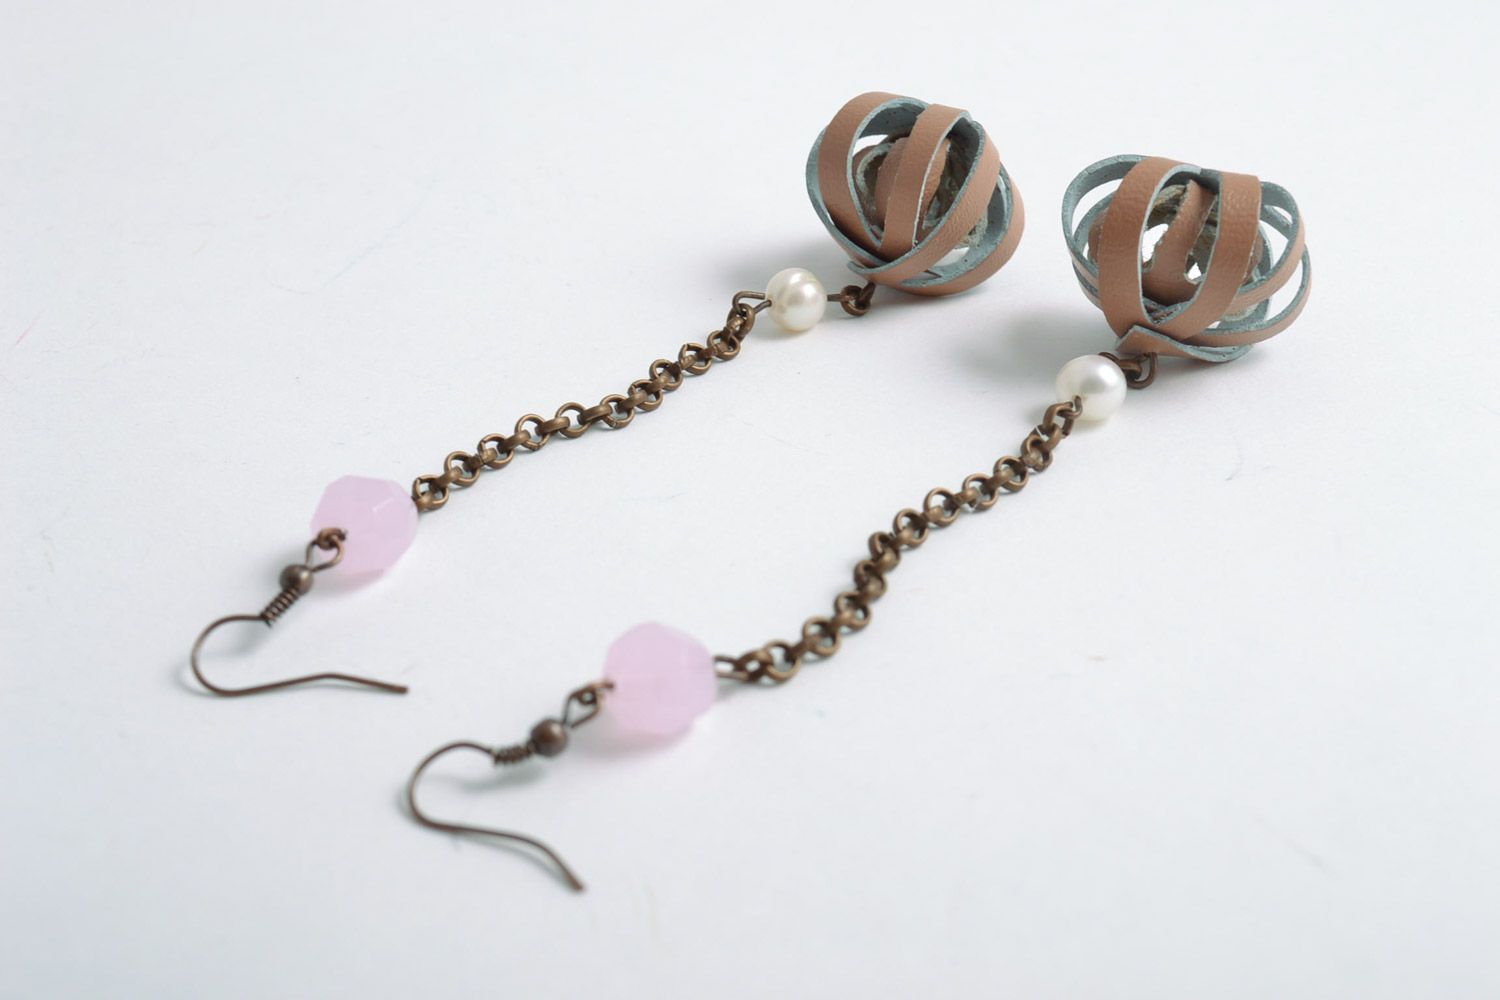 Handmade long earrings with leather charms and natural stones photo 3